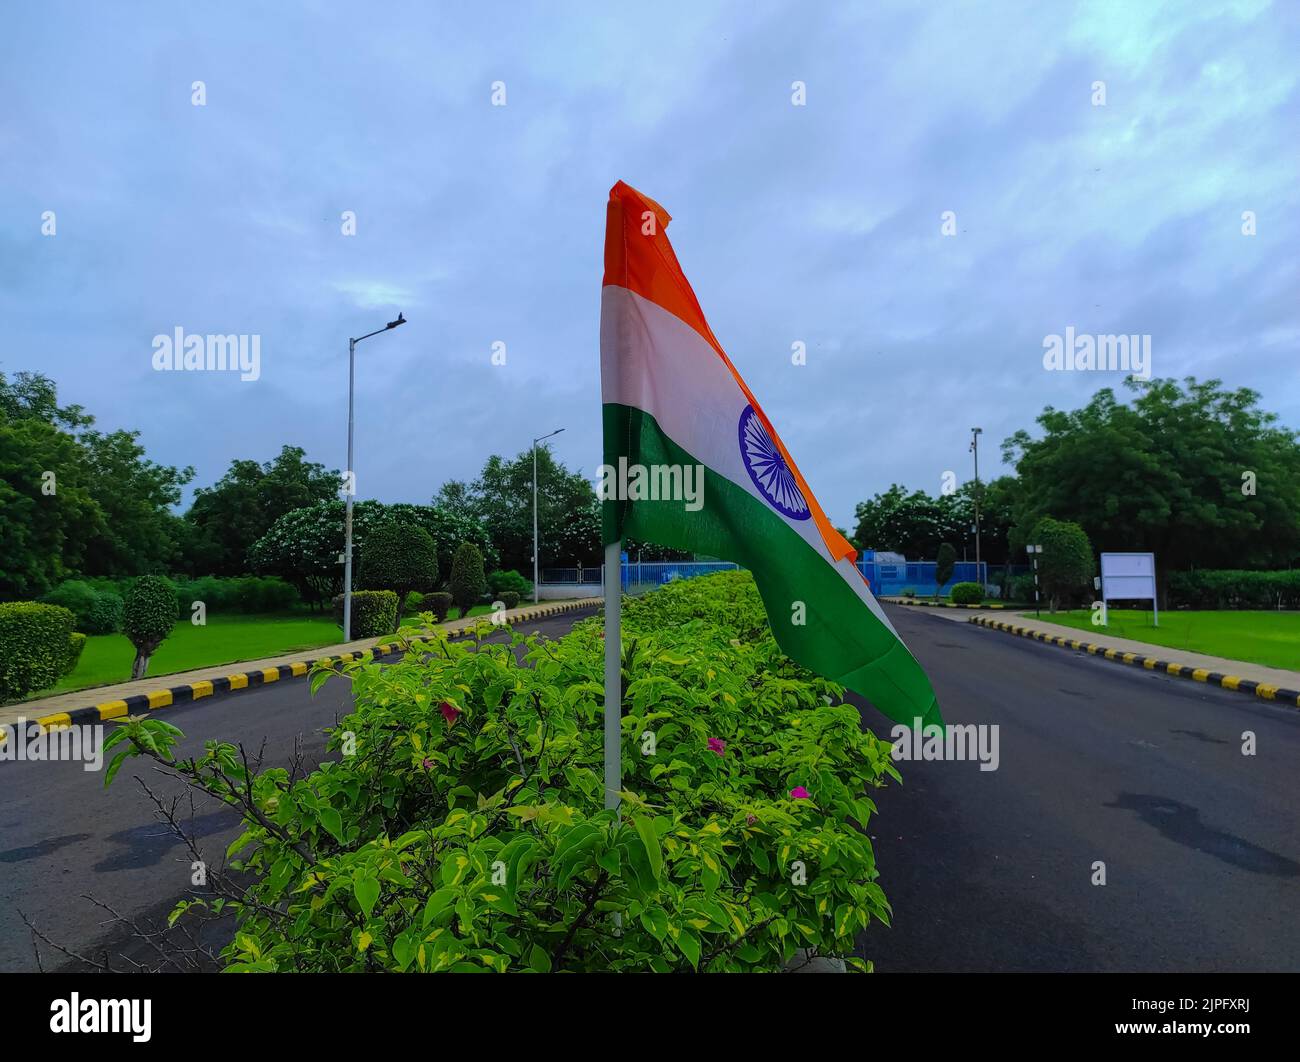 A Indian flag is planted along the trees of the road divider Stock Photo